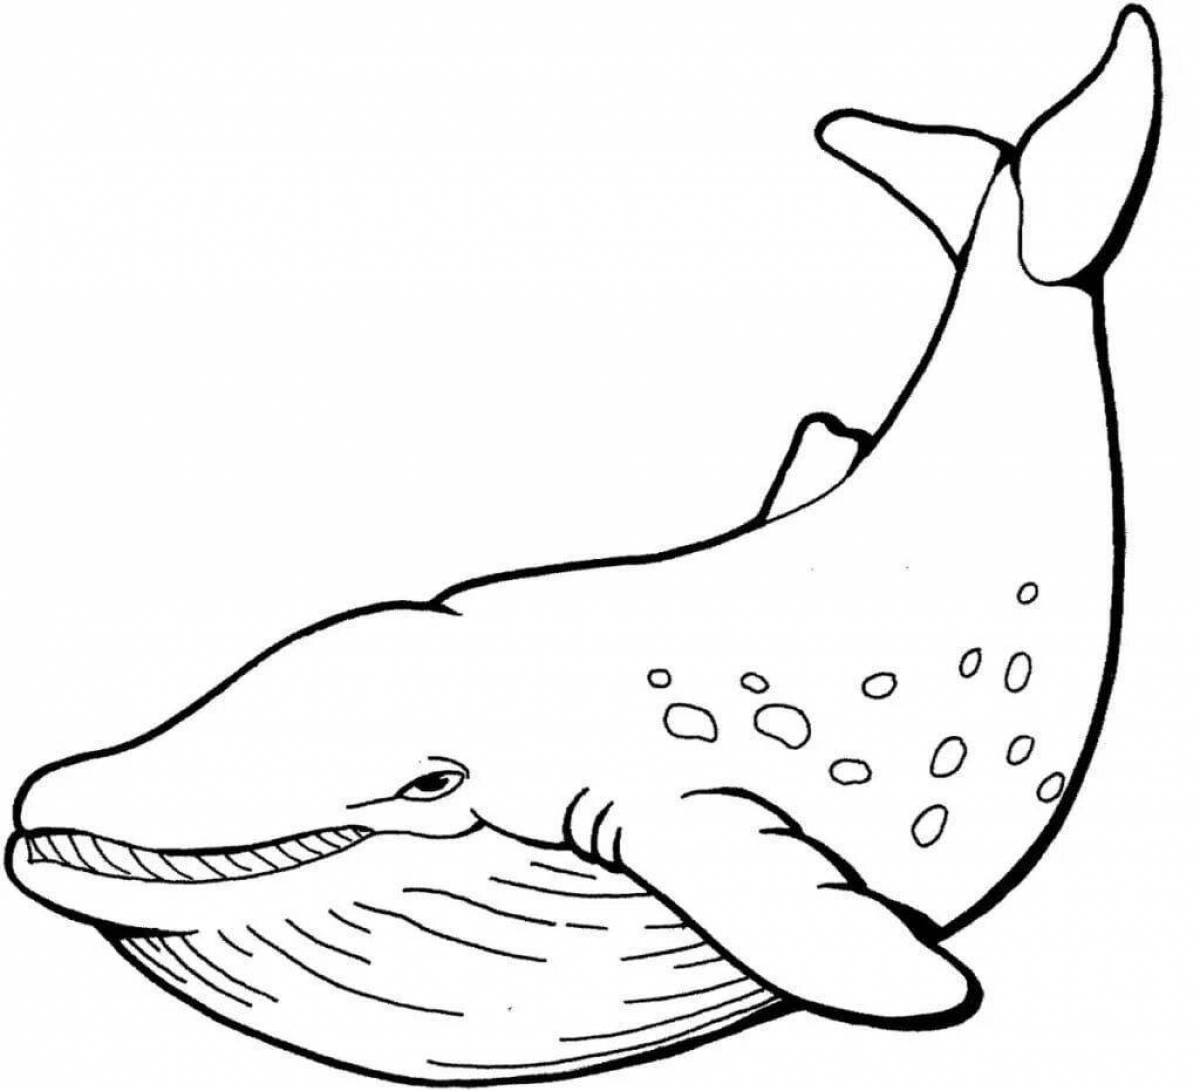 Whale drawing #1